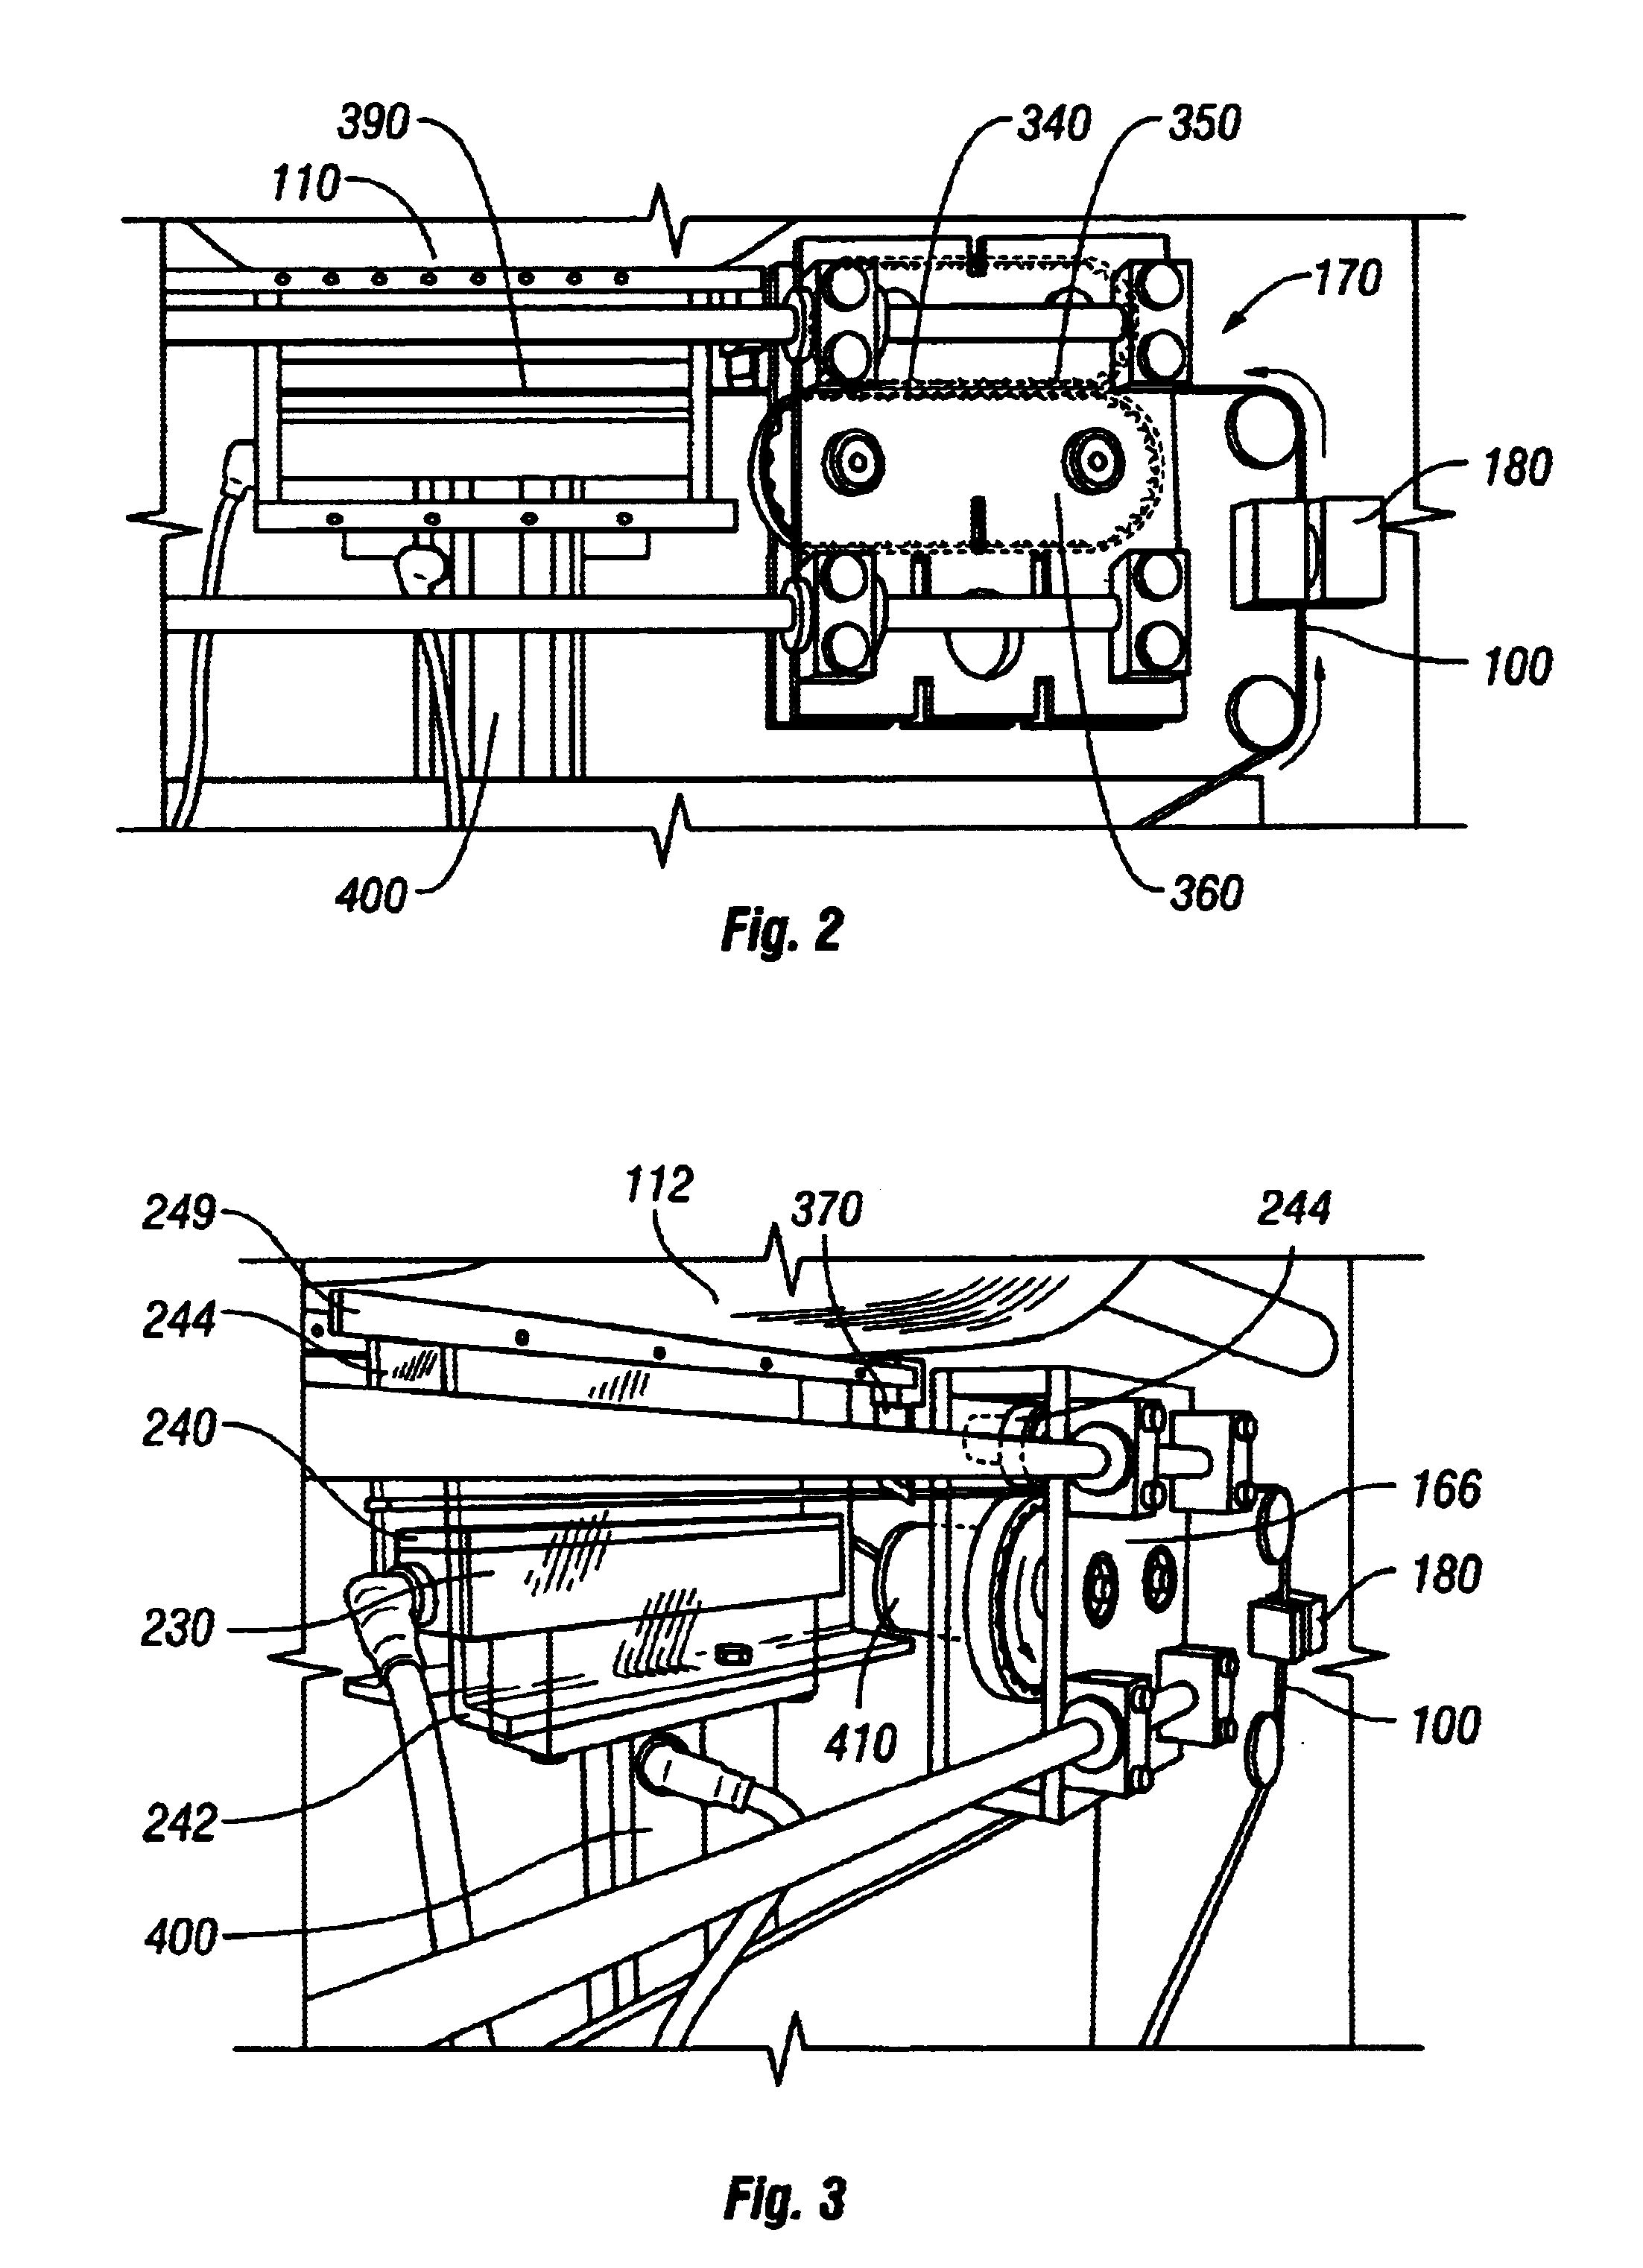 Apparatus and method for manufacturing reclosable bags utilizing zipper tape material